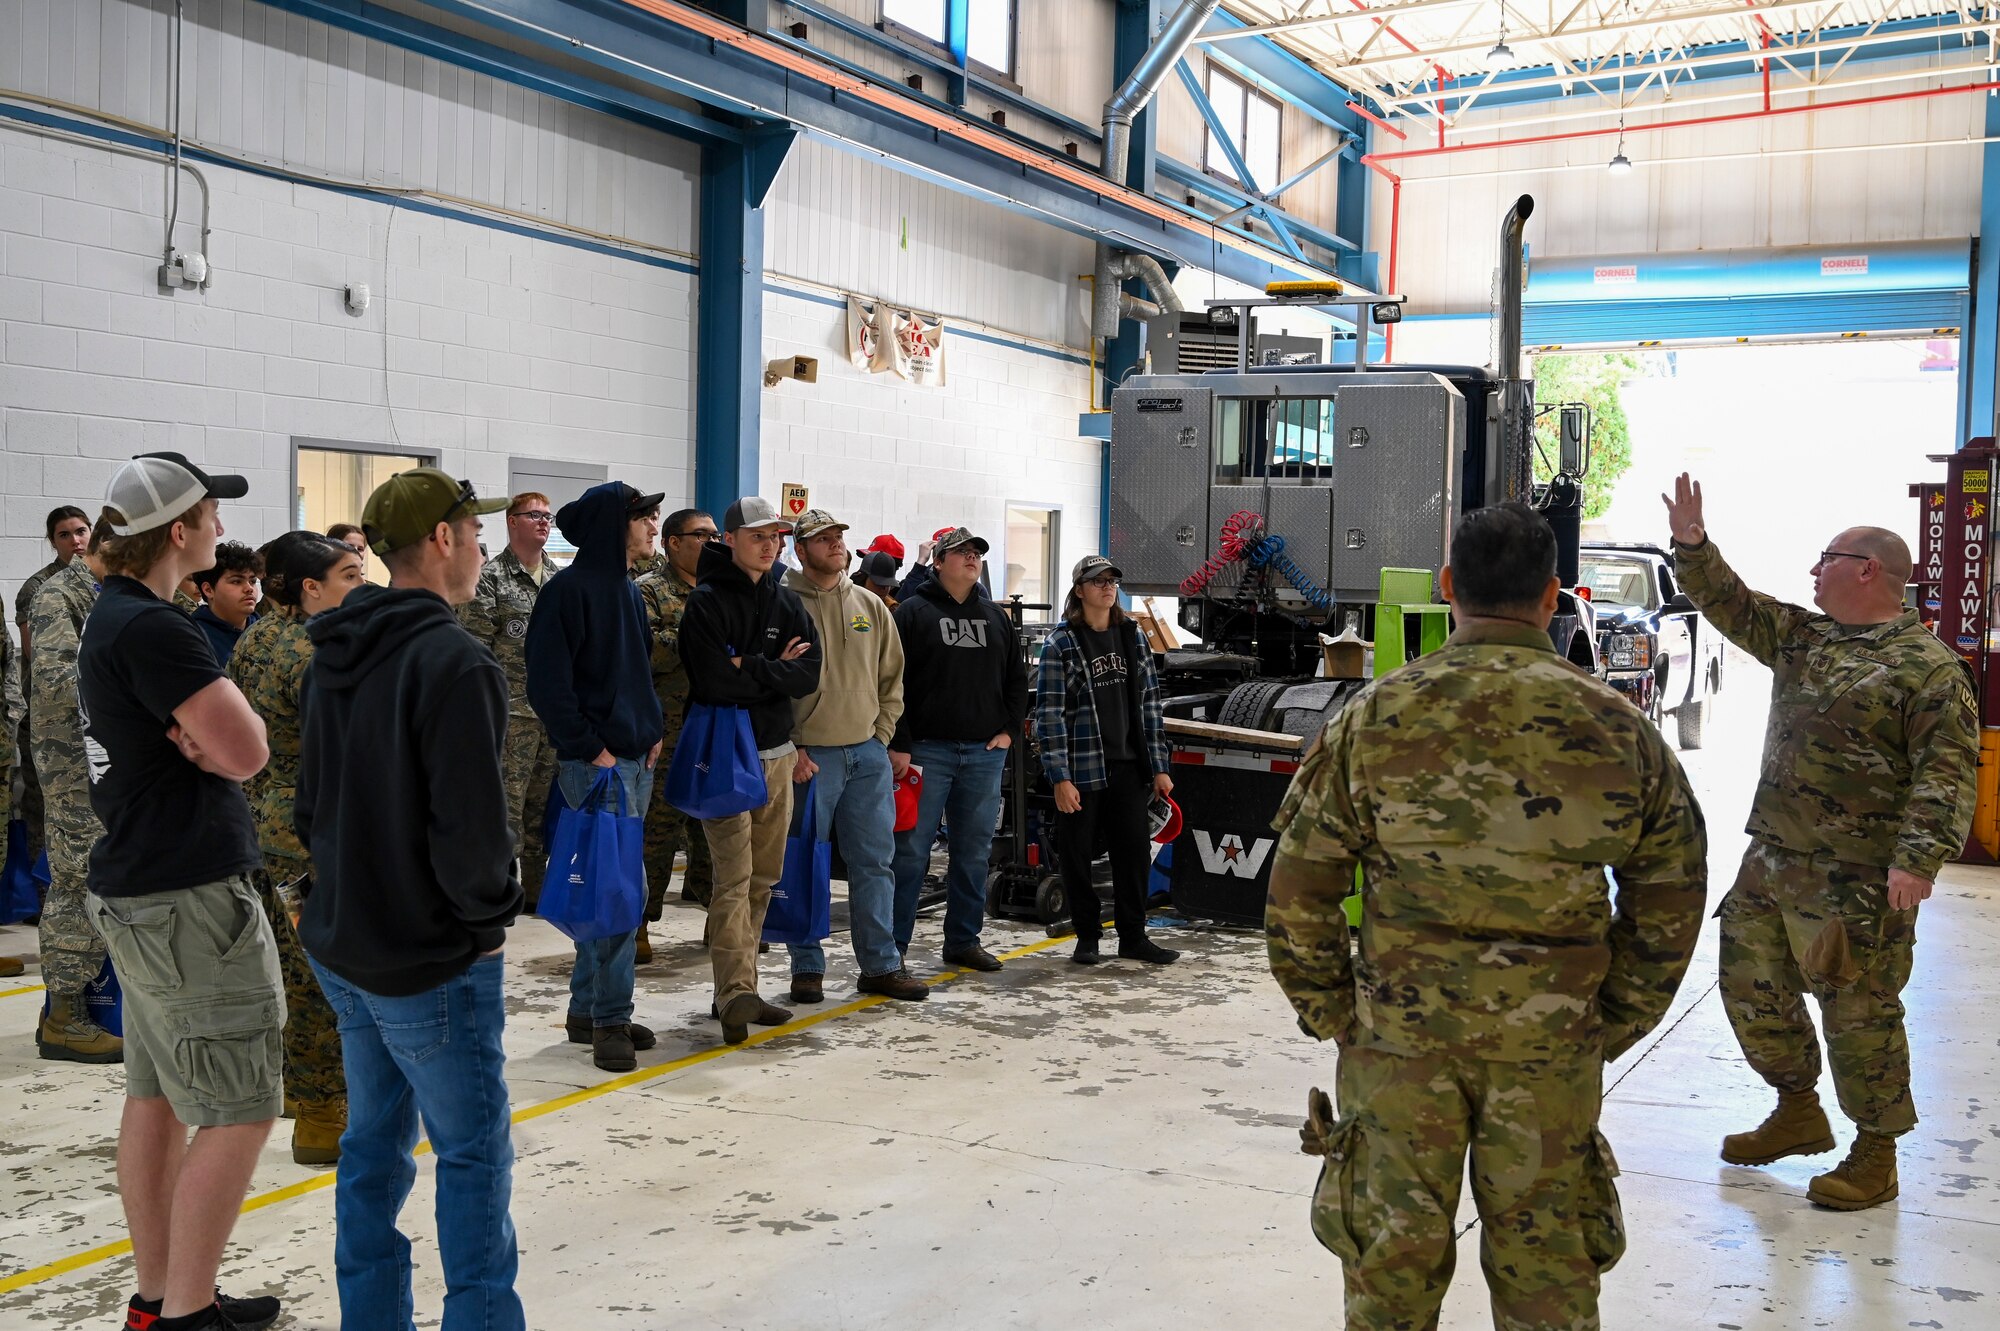 A group of civilian high school students listen to a military servicemember brief in a vehicle maintenance garage.